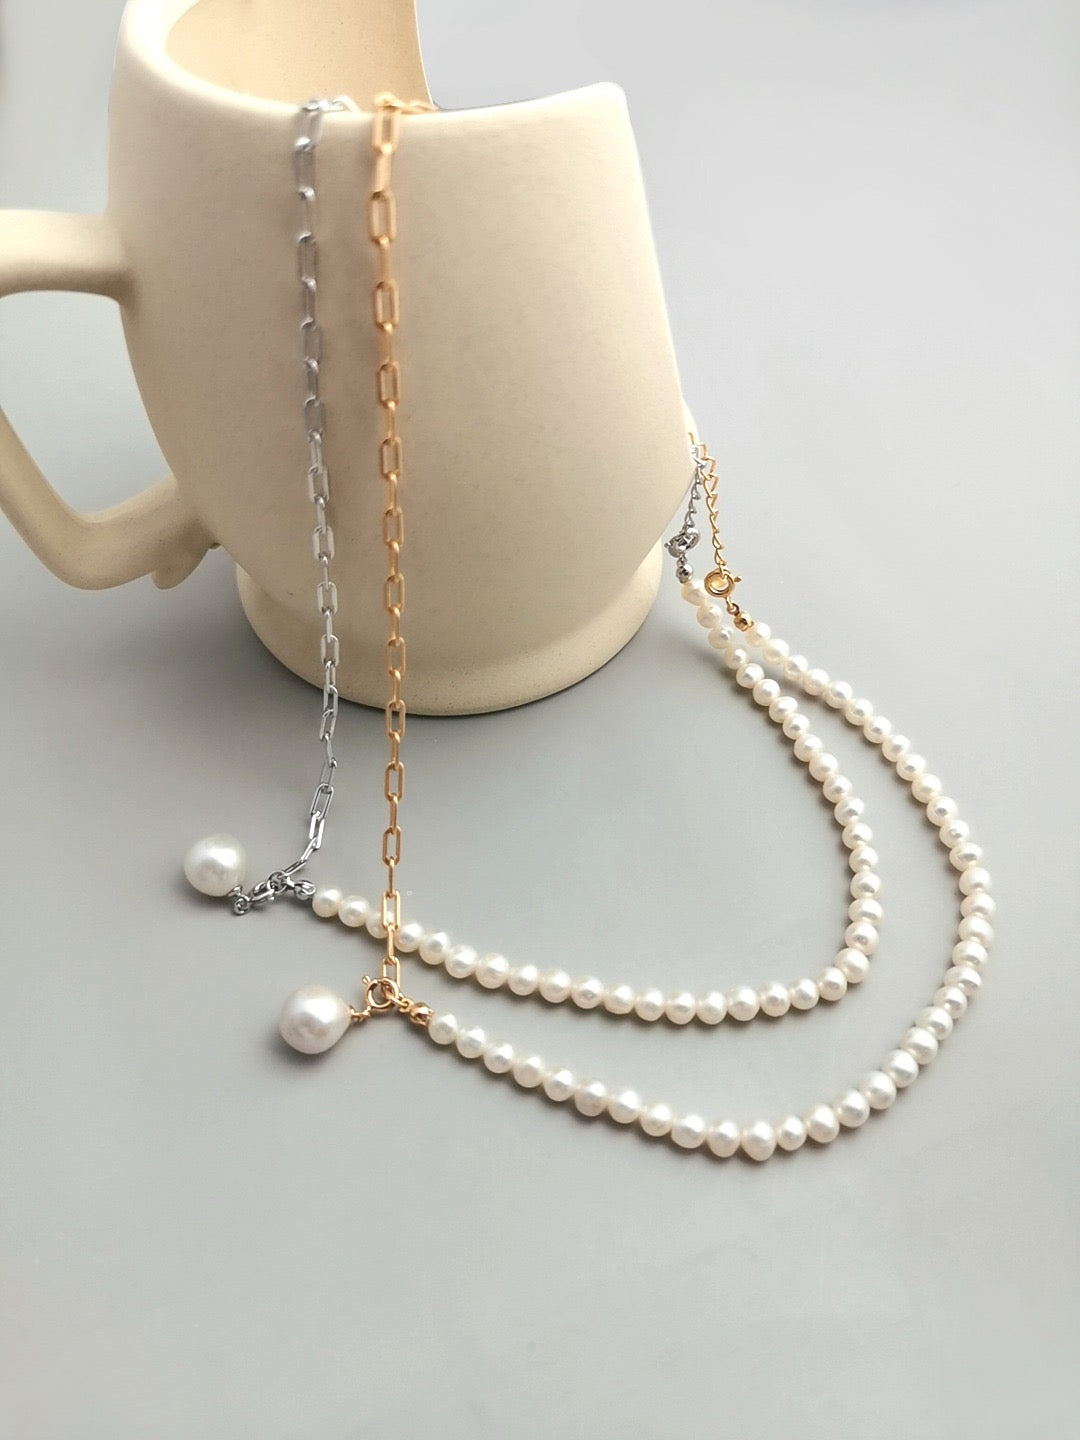 Asymmetric Baroque Pearl Necklace necklaces from SHOPQAQ